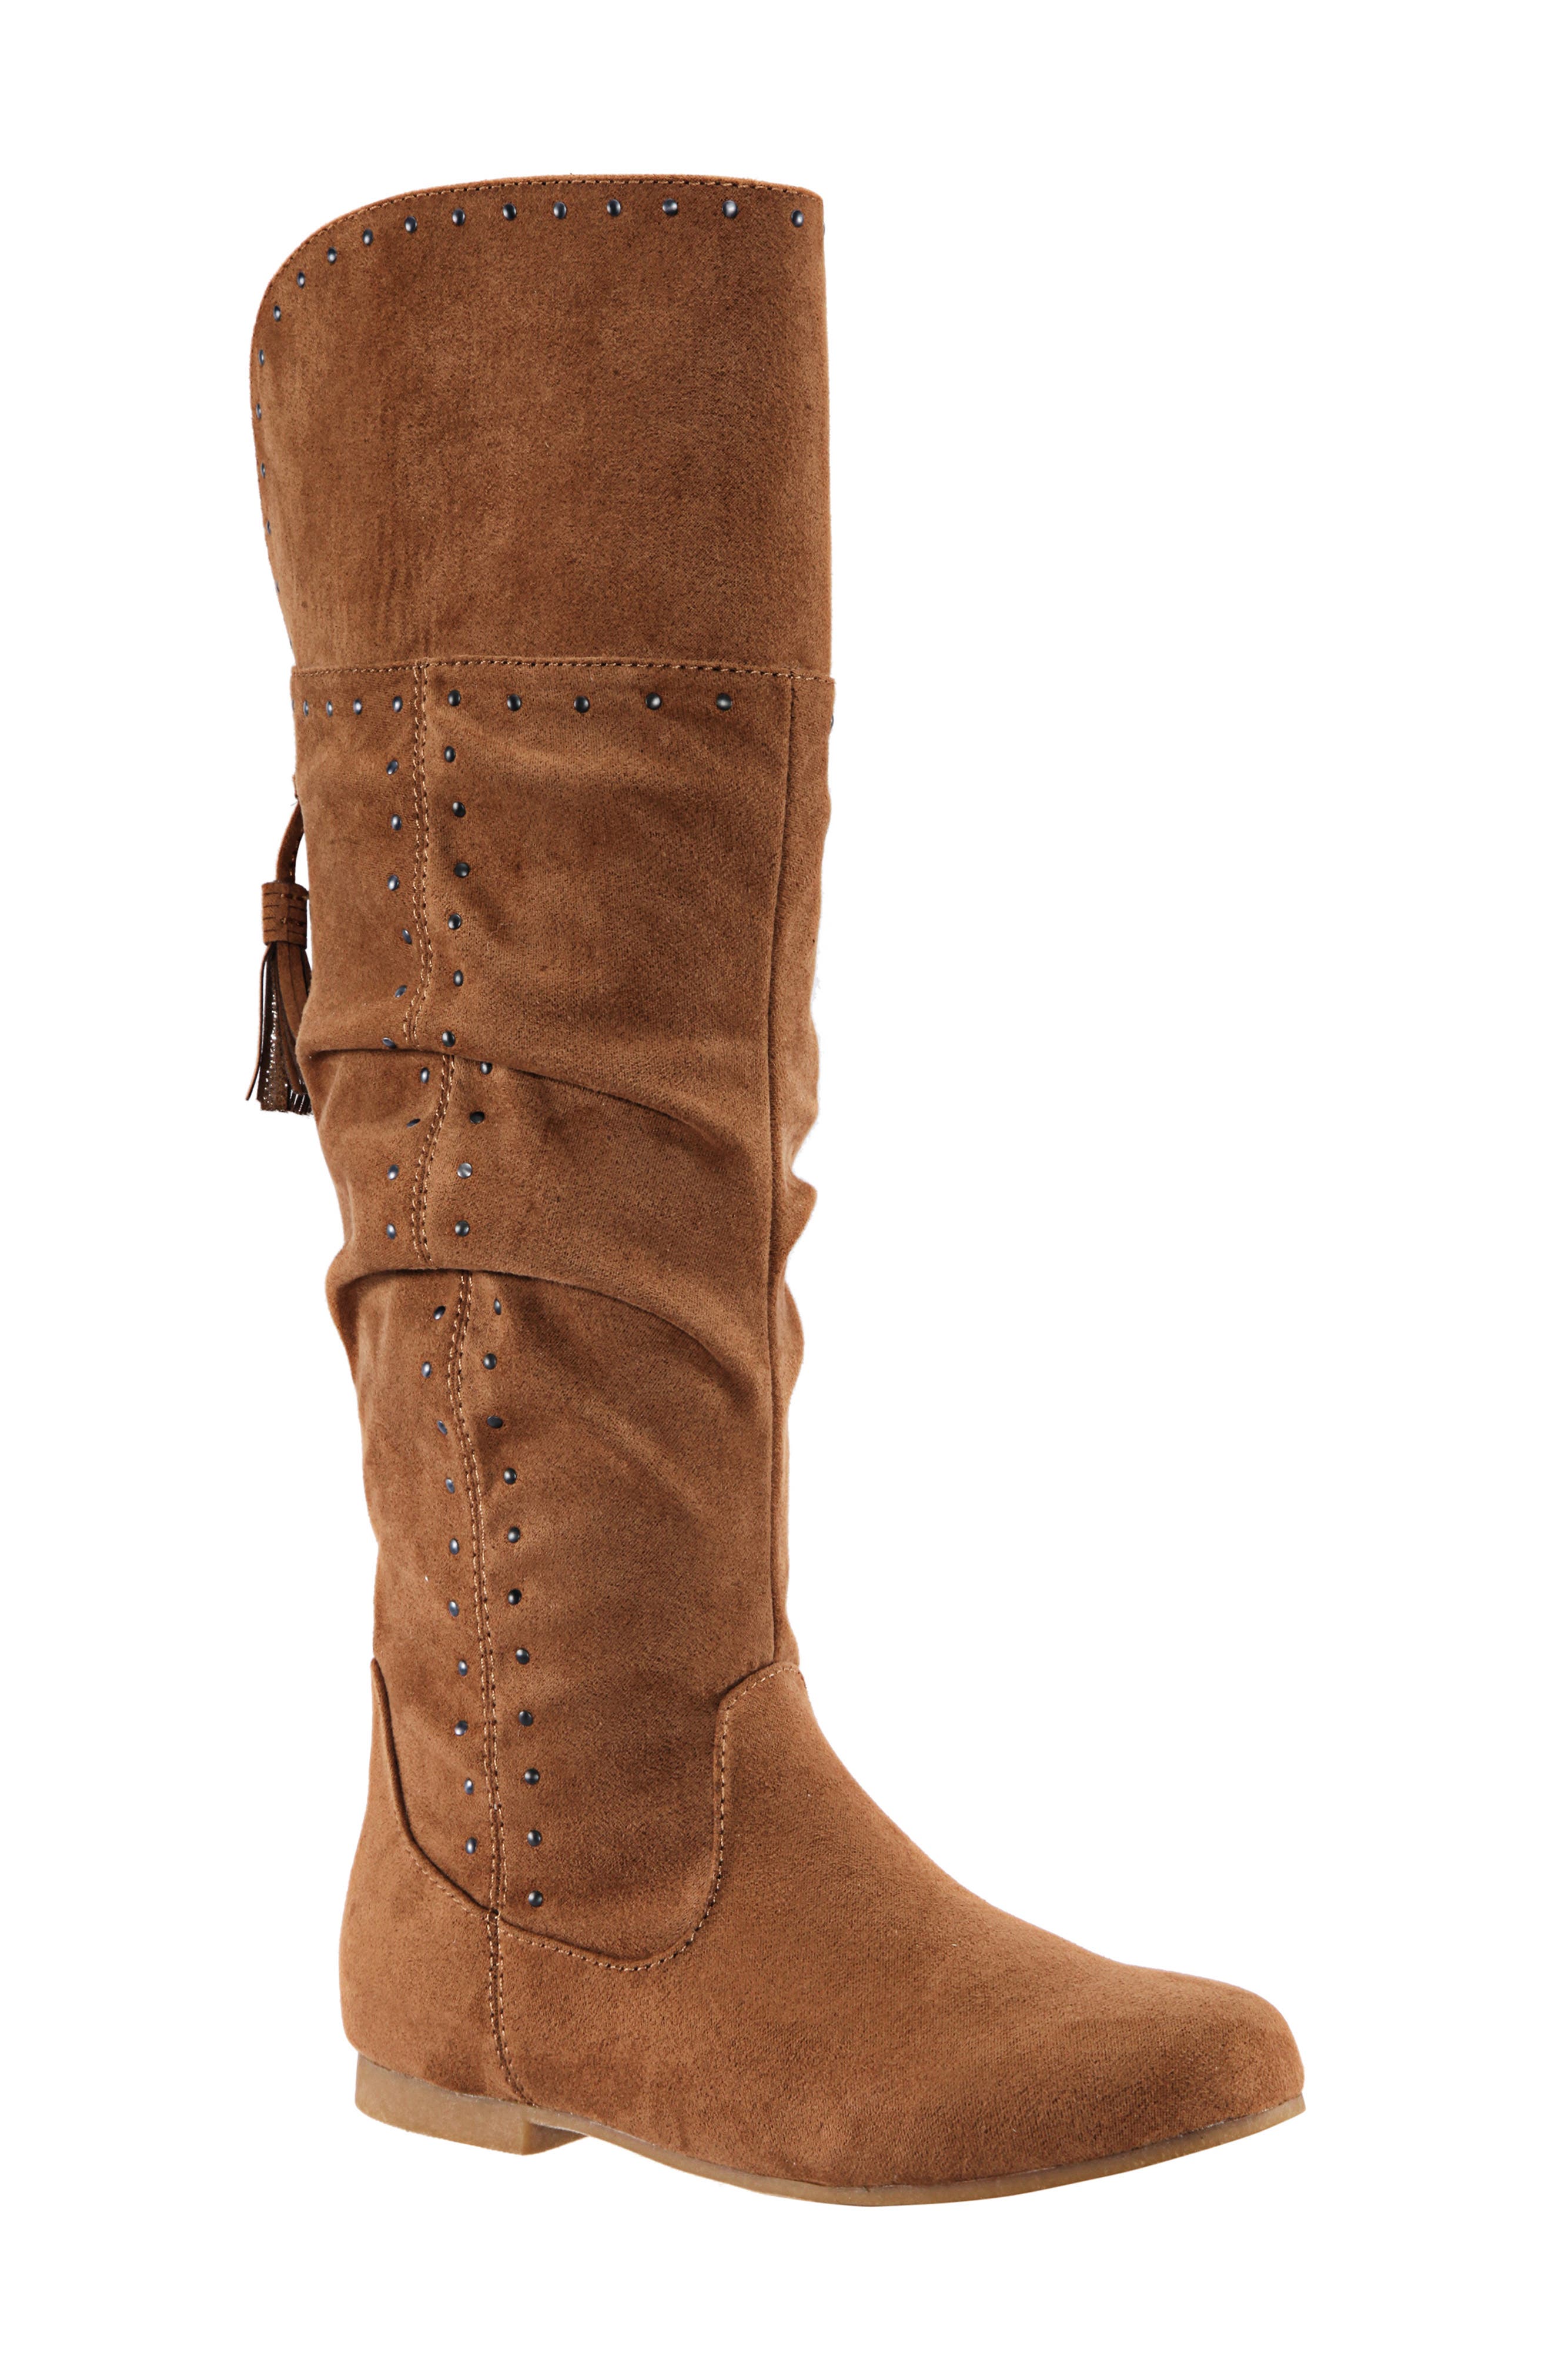 UPC 794378366959 product image for Girl's Nina Gem Slouchy Studded Boot, Size 5 M - Brown | upcitemdb.com